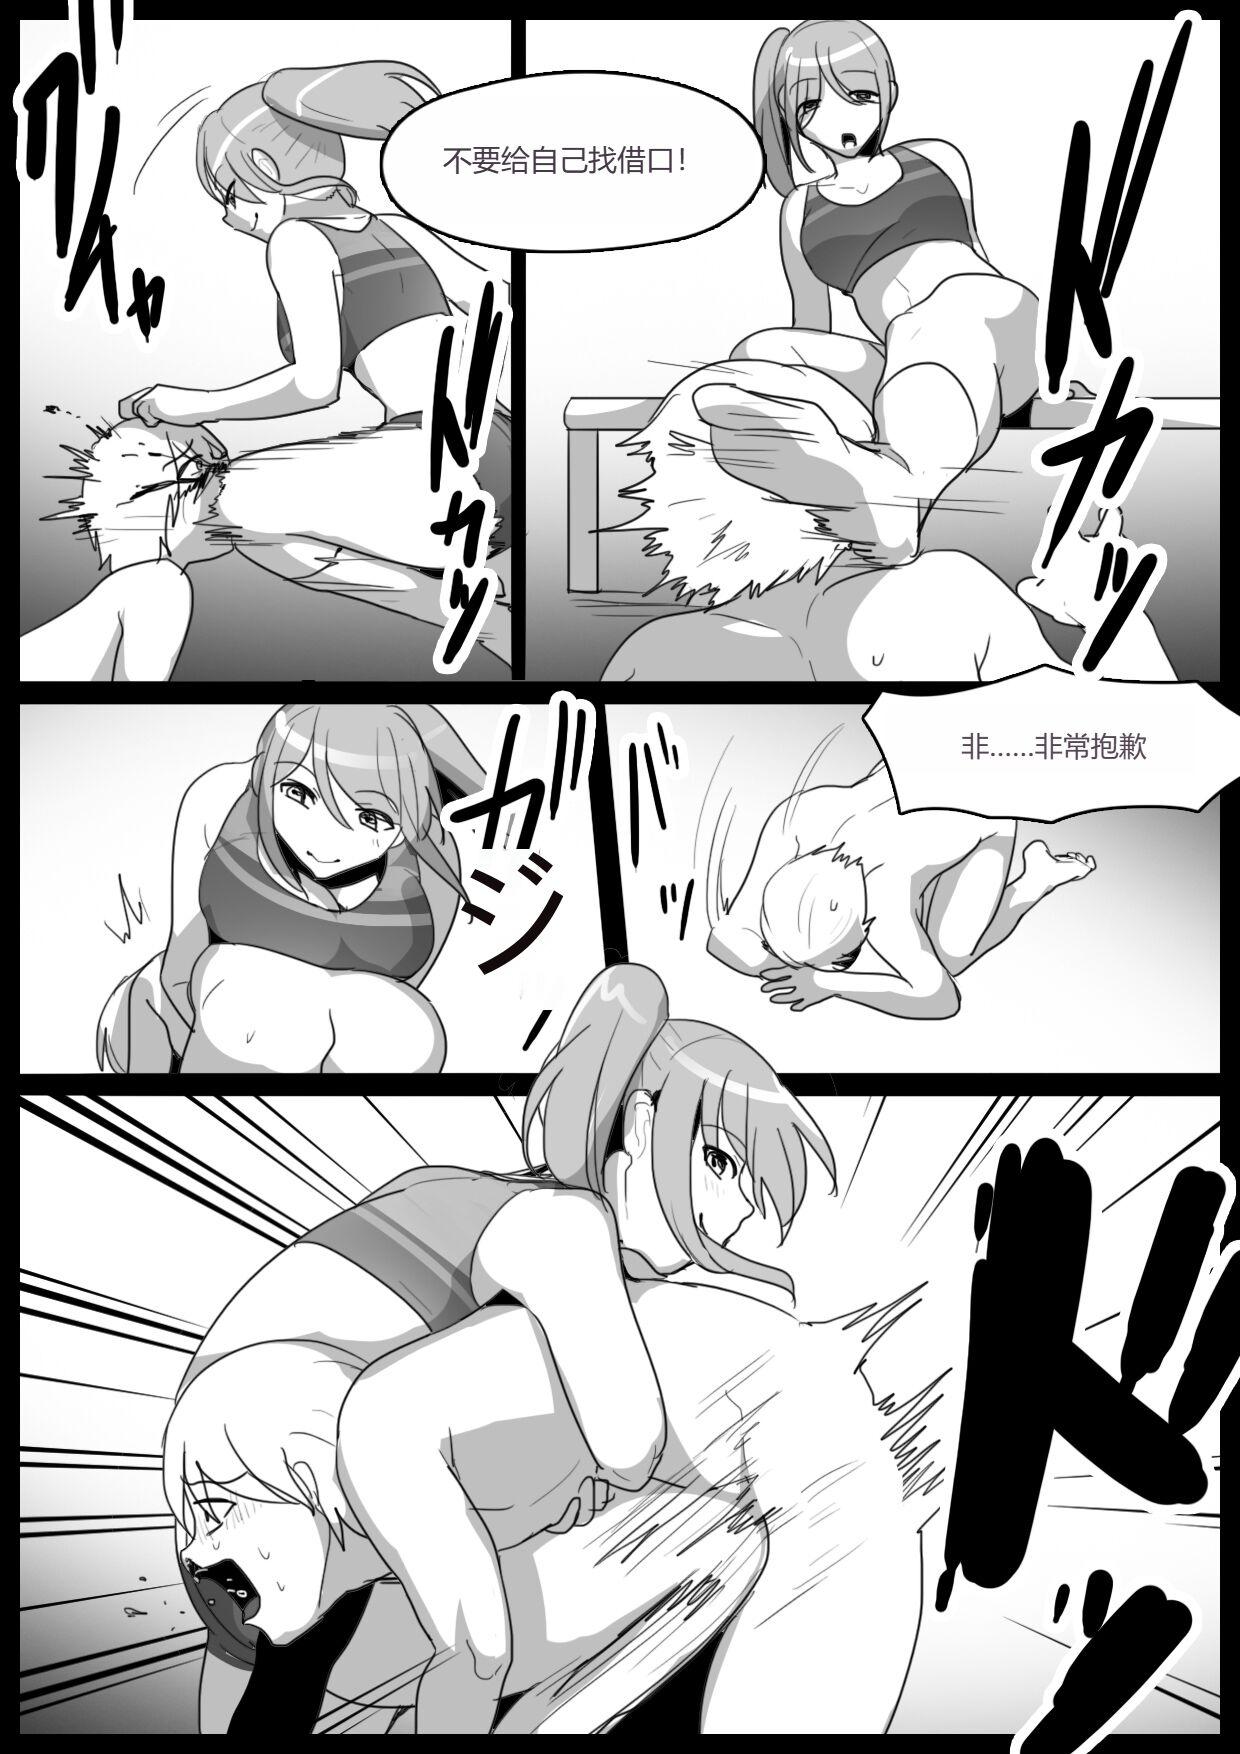 Casero Spin-Off of Girls Beat by Rie 一个人汉化 - Original Thailand - Page 6